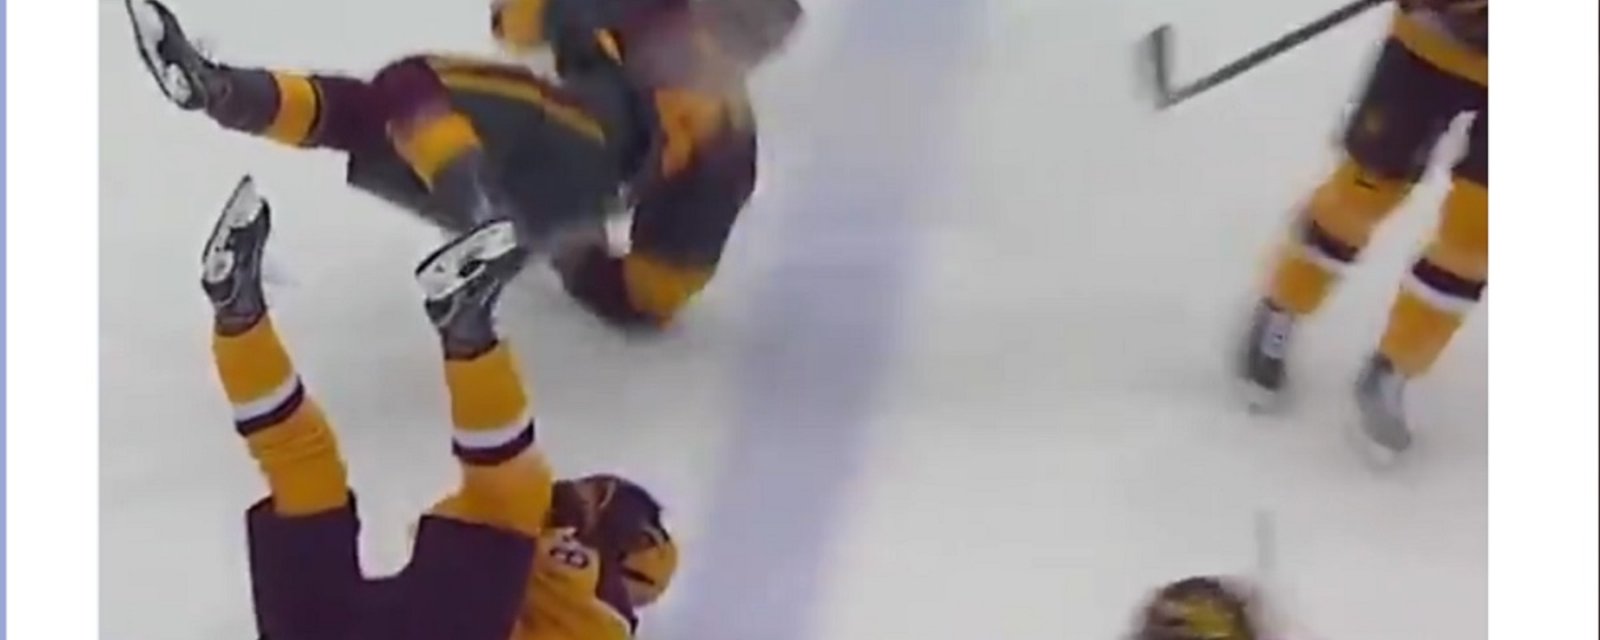 Insane college hockey hit is the most brutal impact of the year.